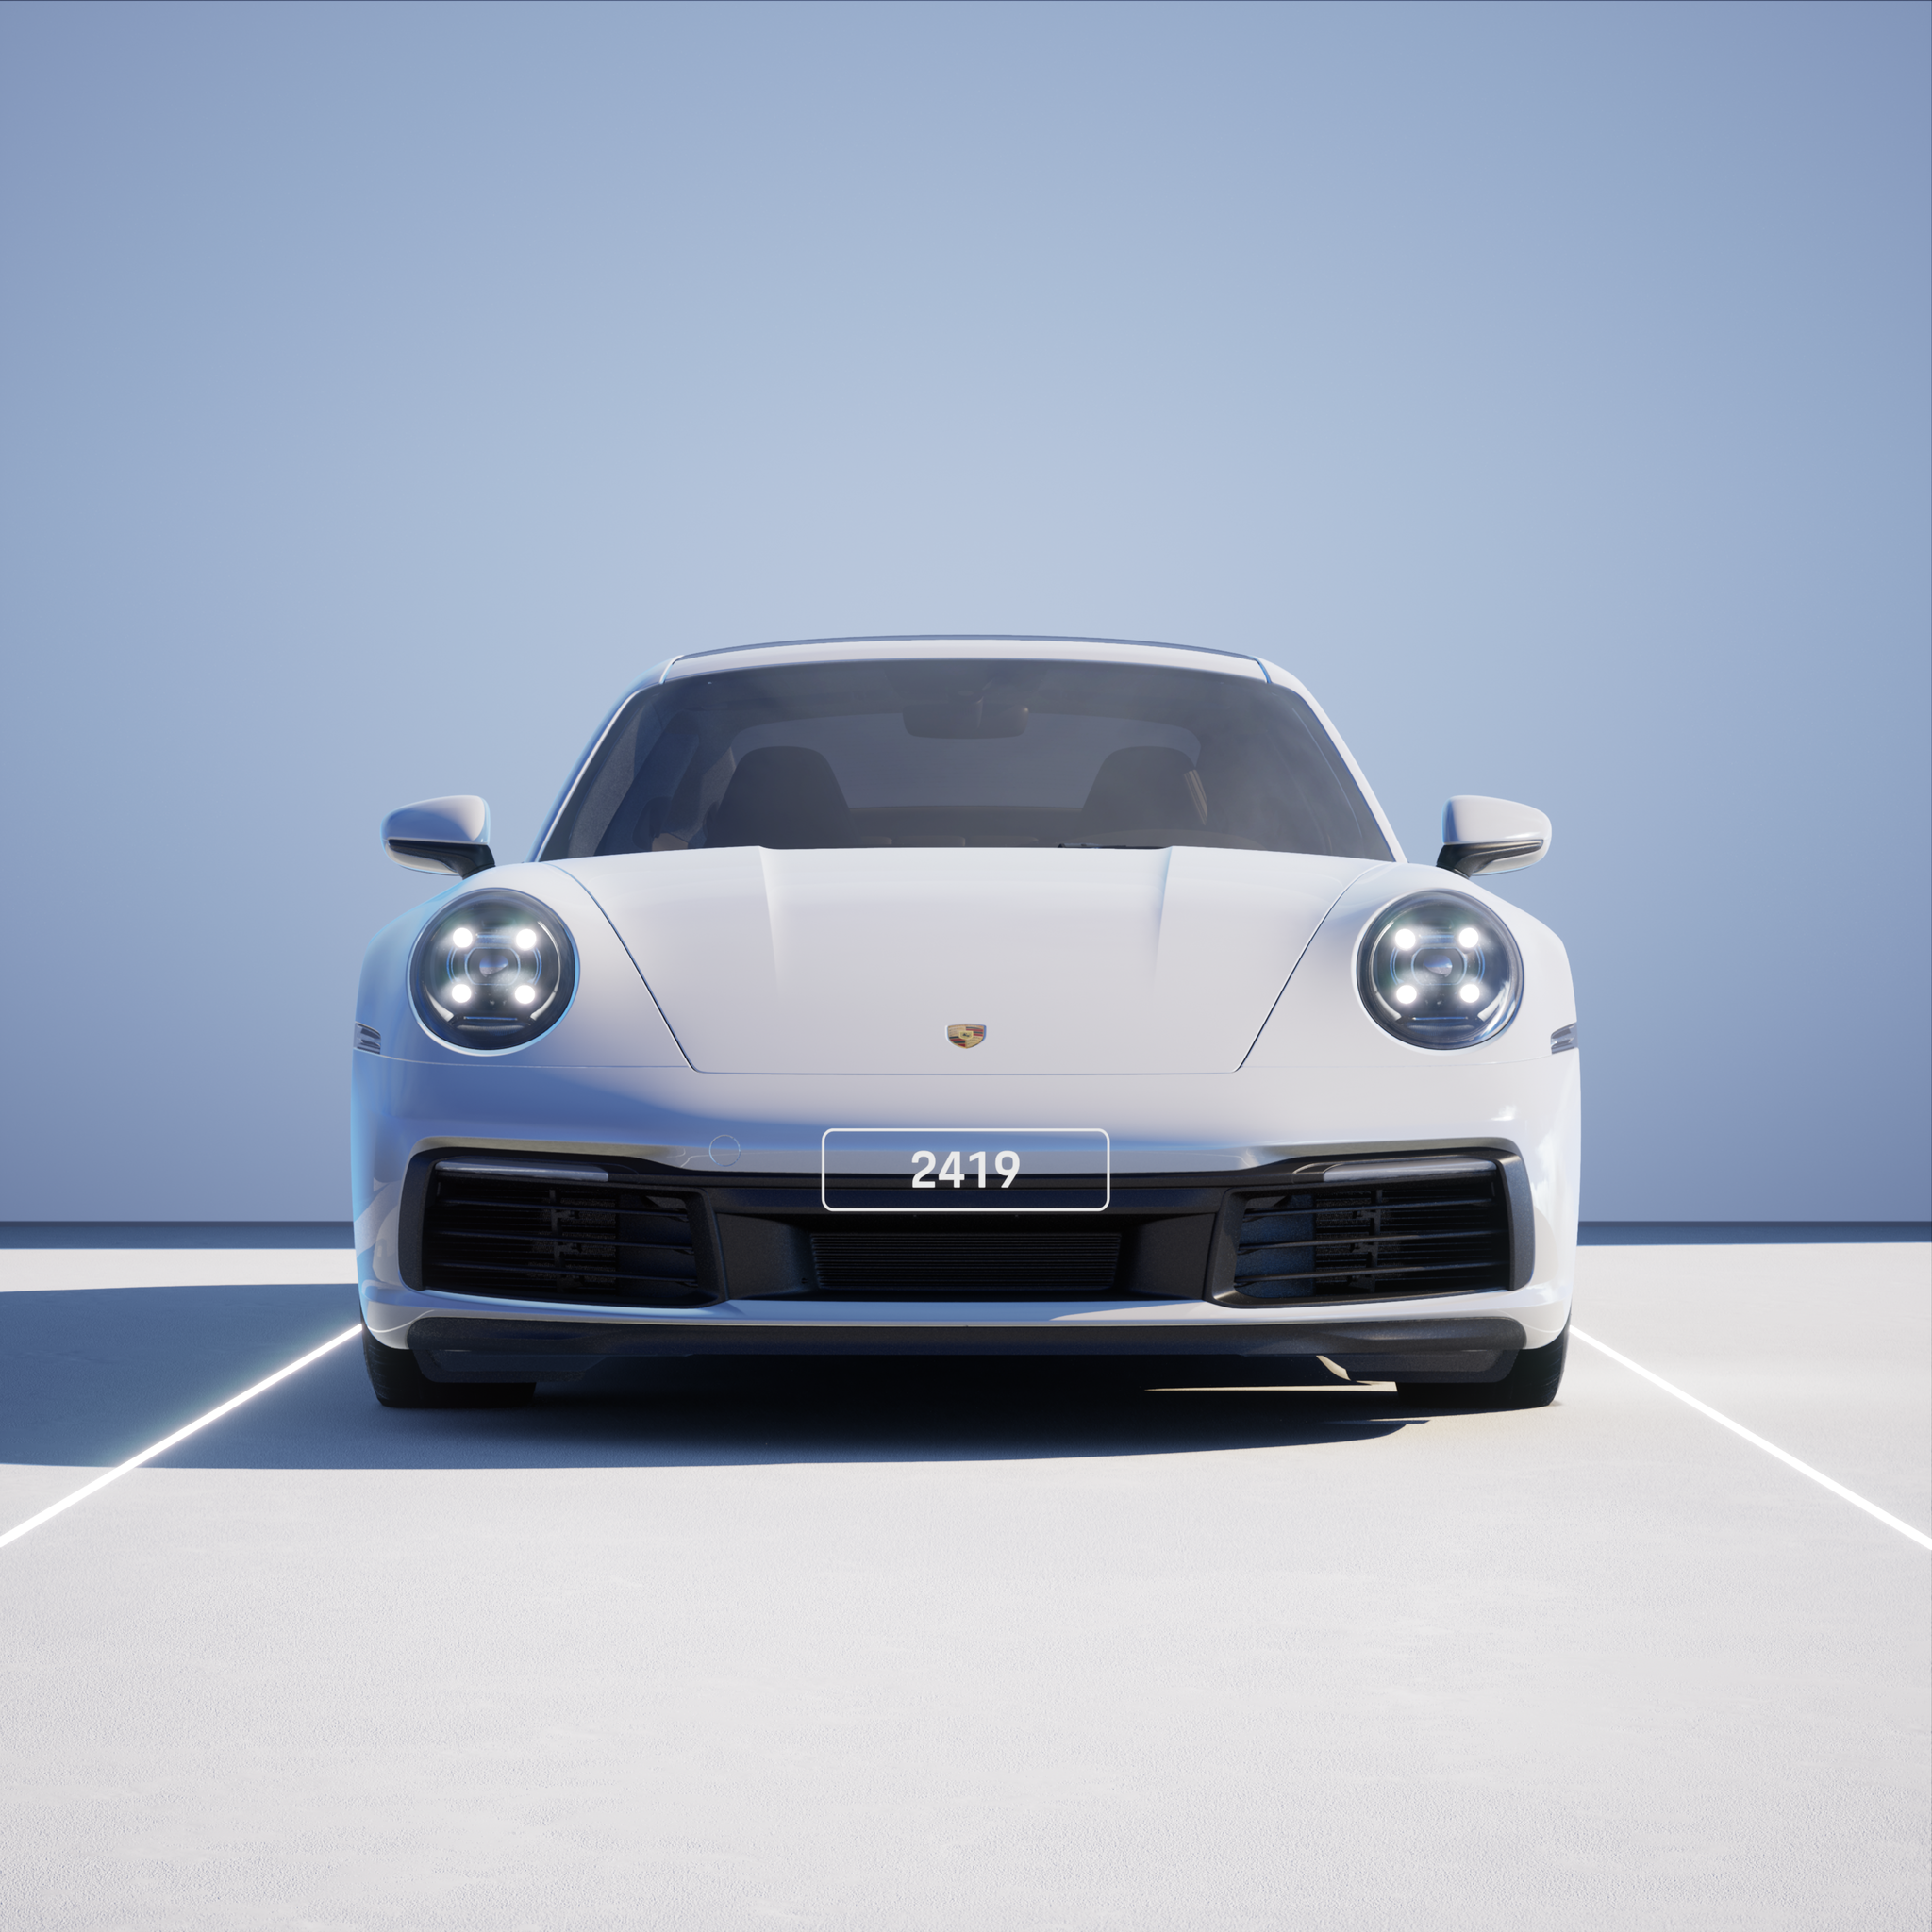 The PORSCHΞ 911 2419 image in phase